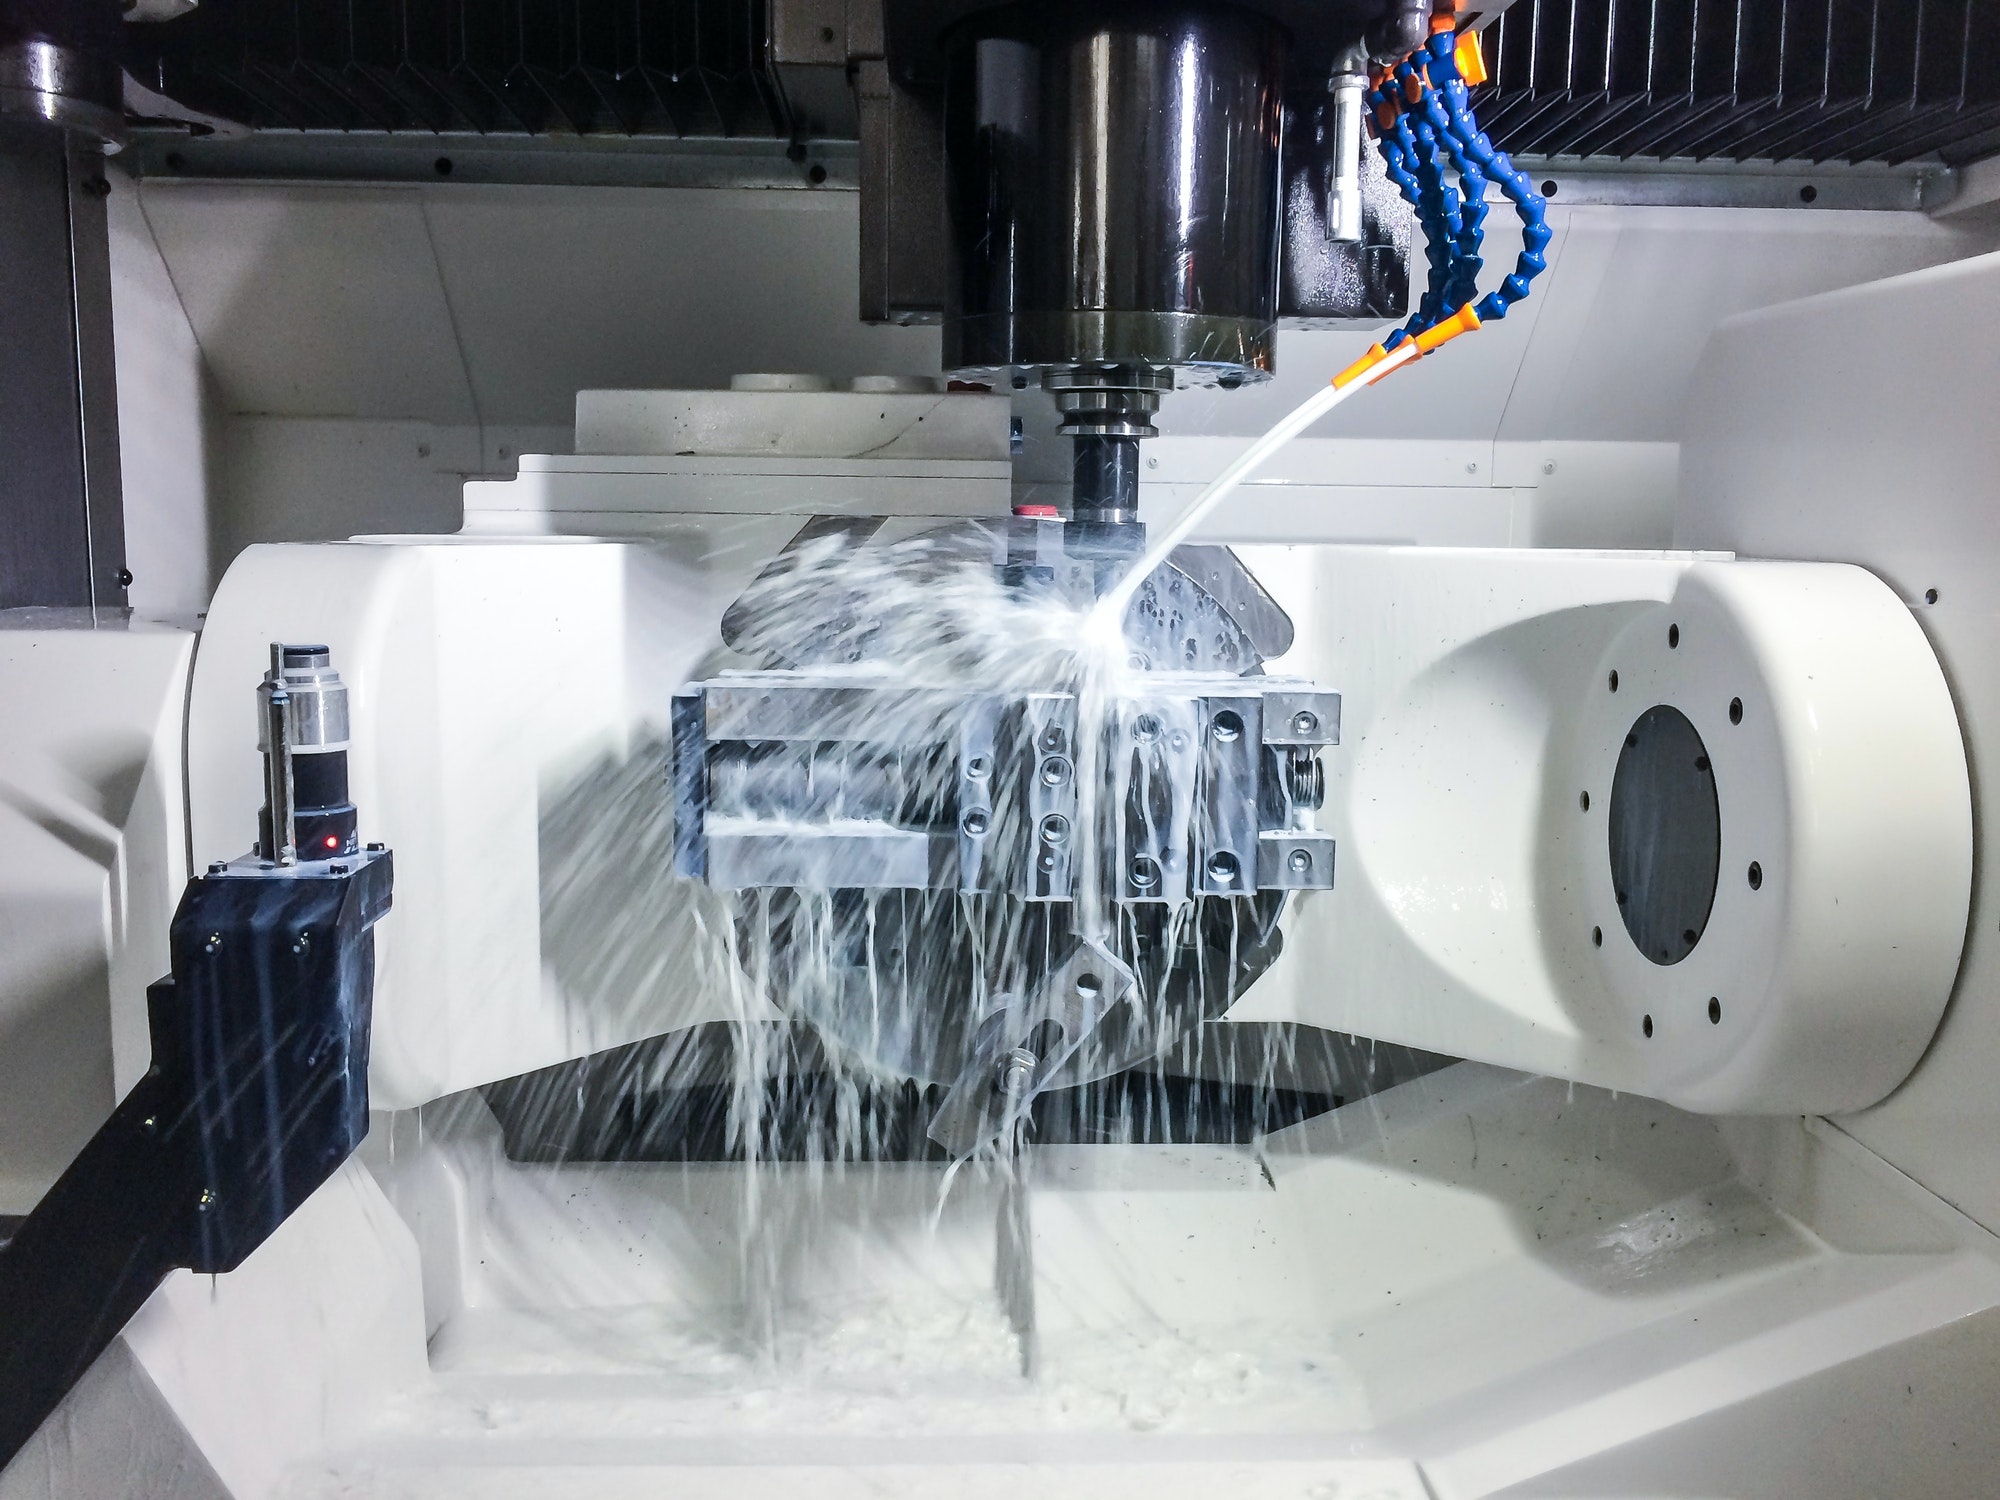 CNC milling machine in 5 axis